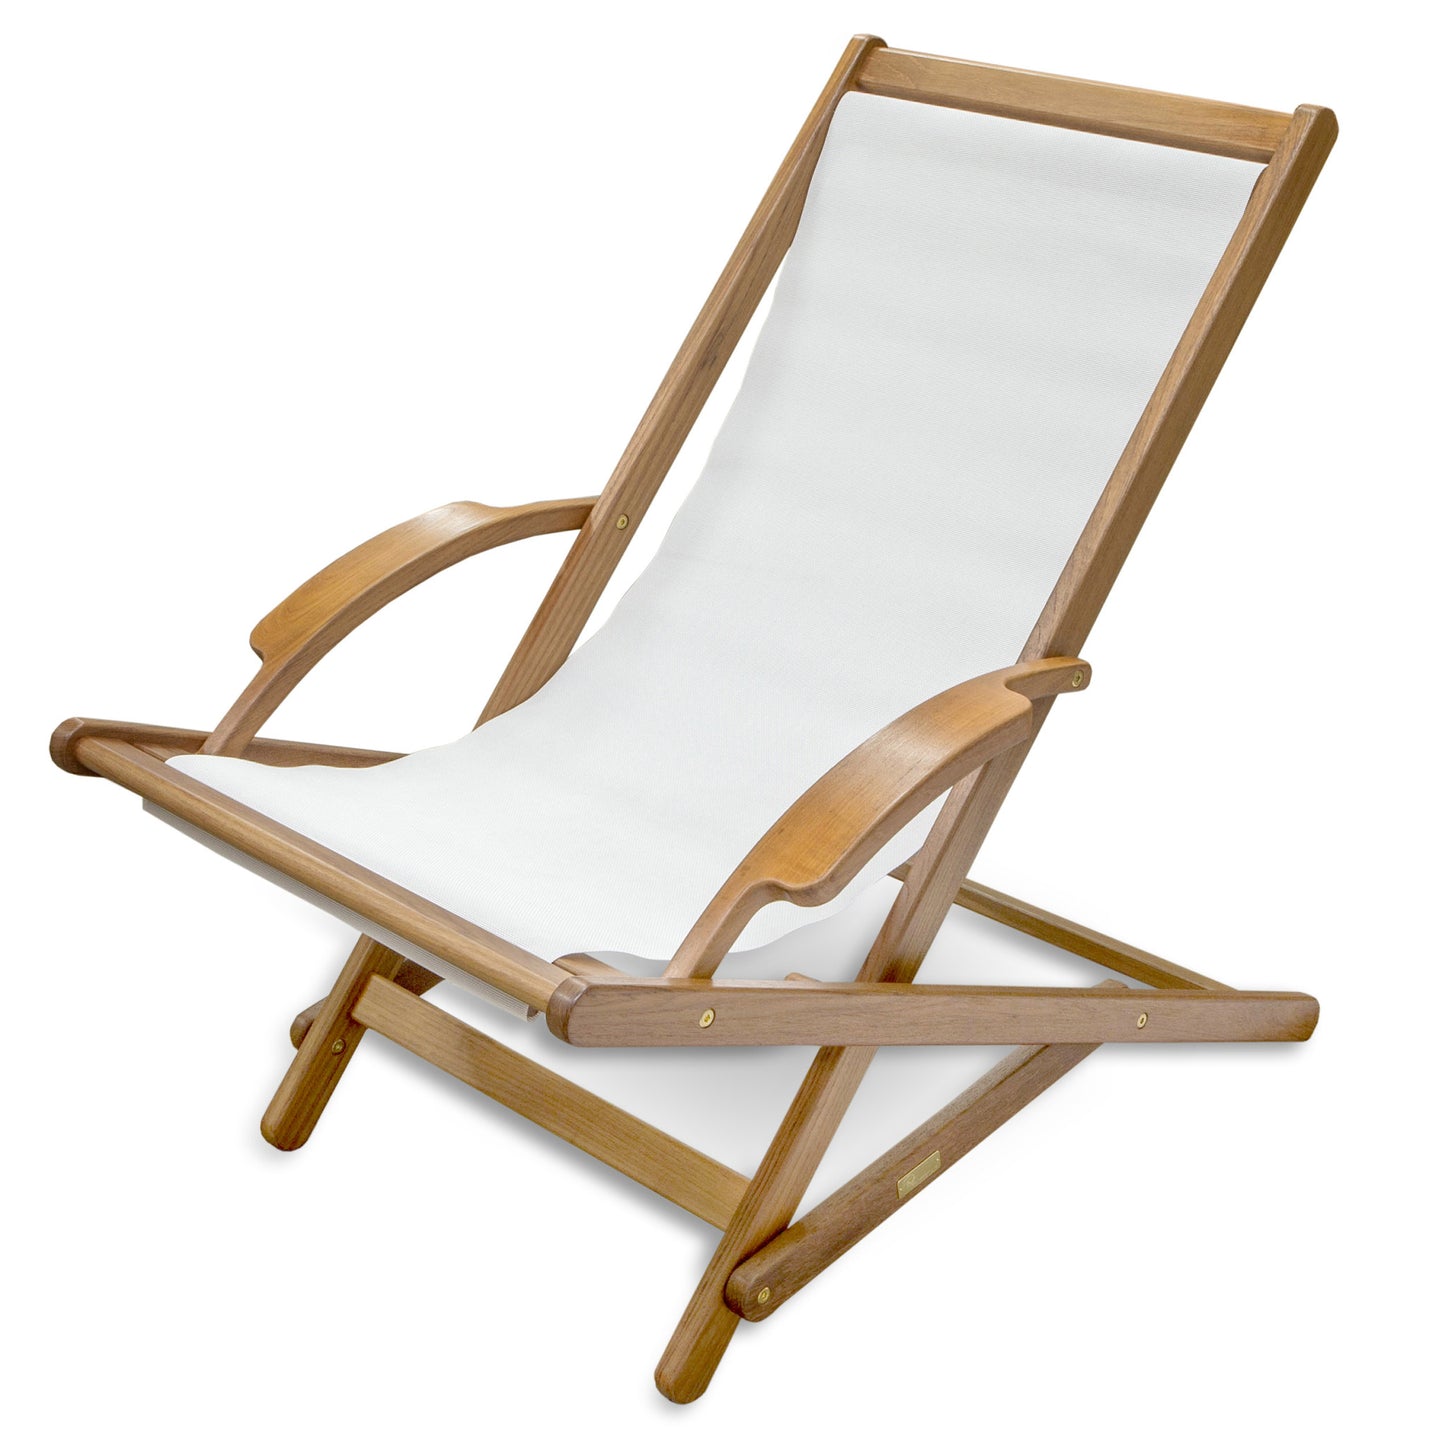 27" White and Natural Wood Solid Wood Indoor Outdoor Deck Chair